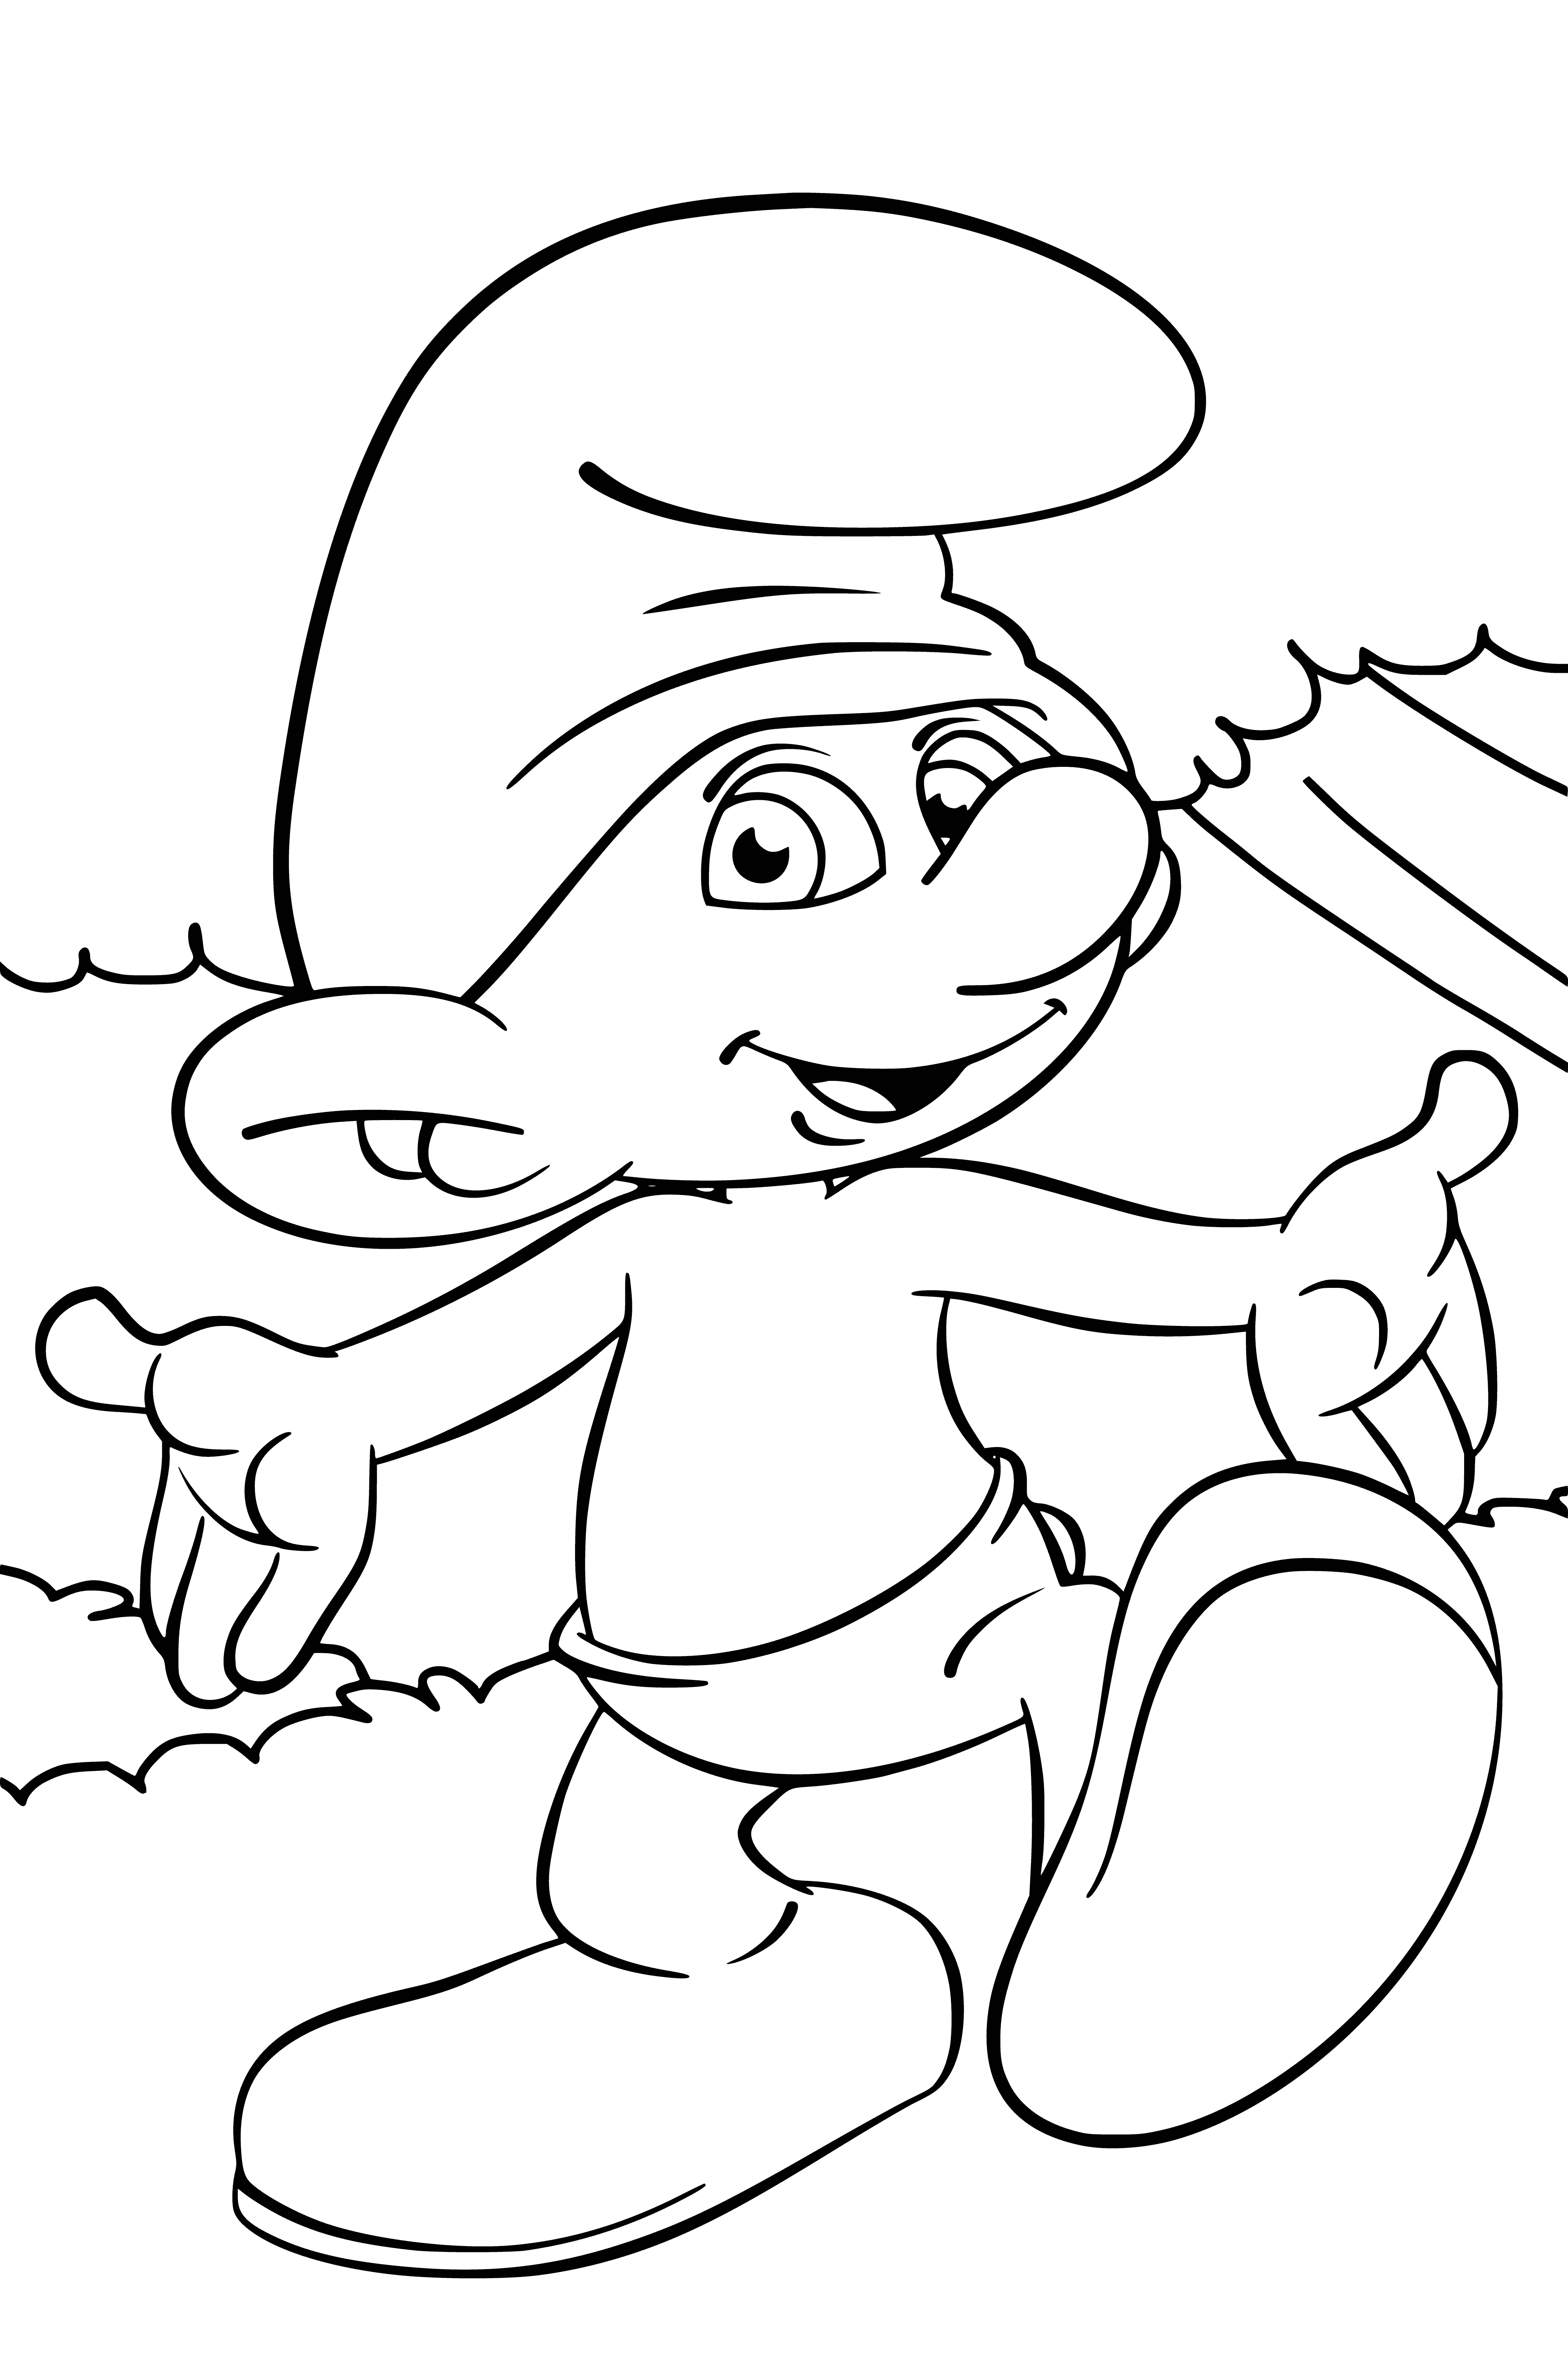 coloring page: The Smurfs, led by Papa Smurf, are a joyful small blue humanoid race who help each other them in their mushroom homes.